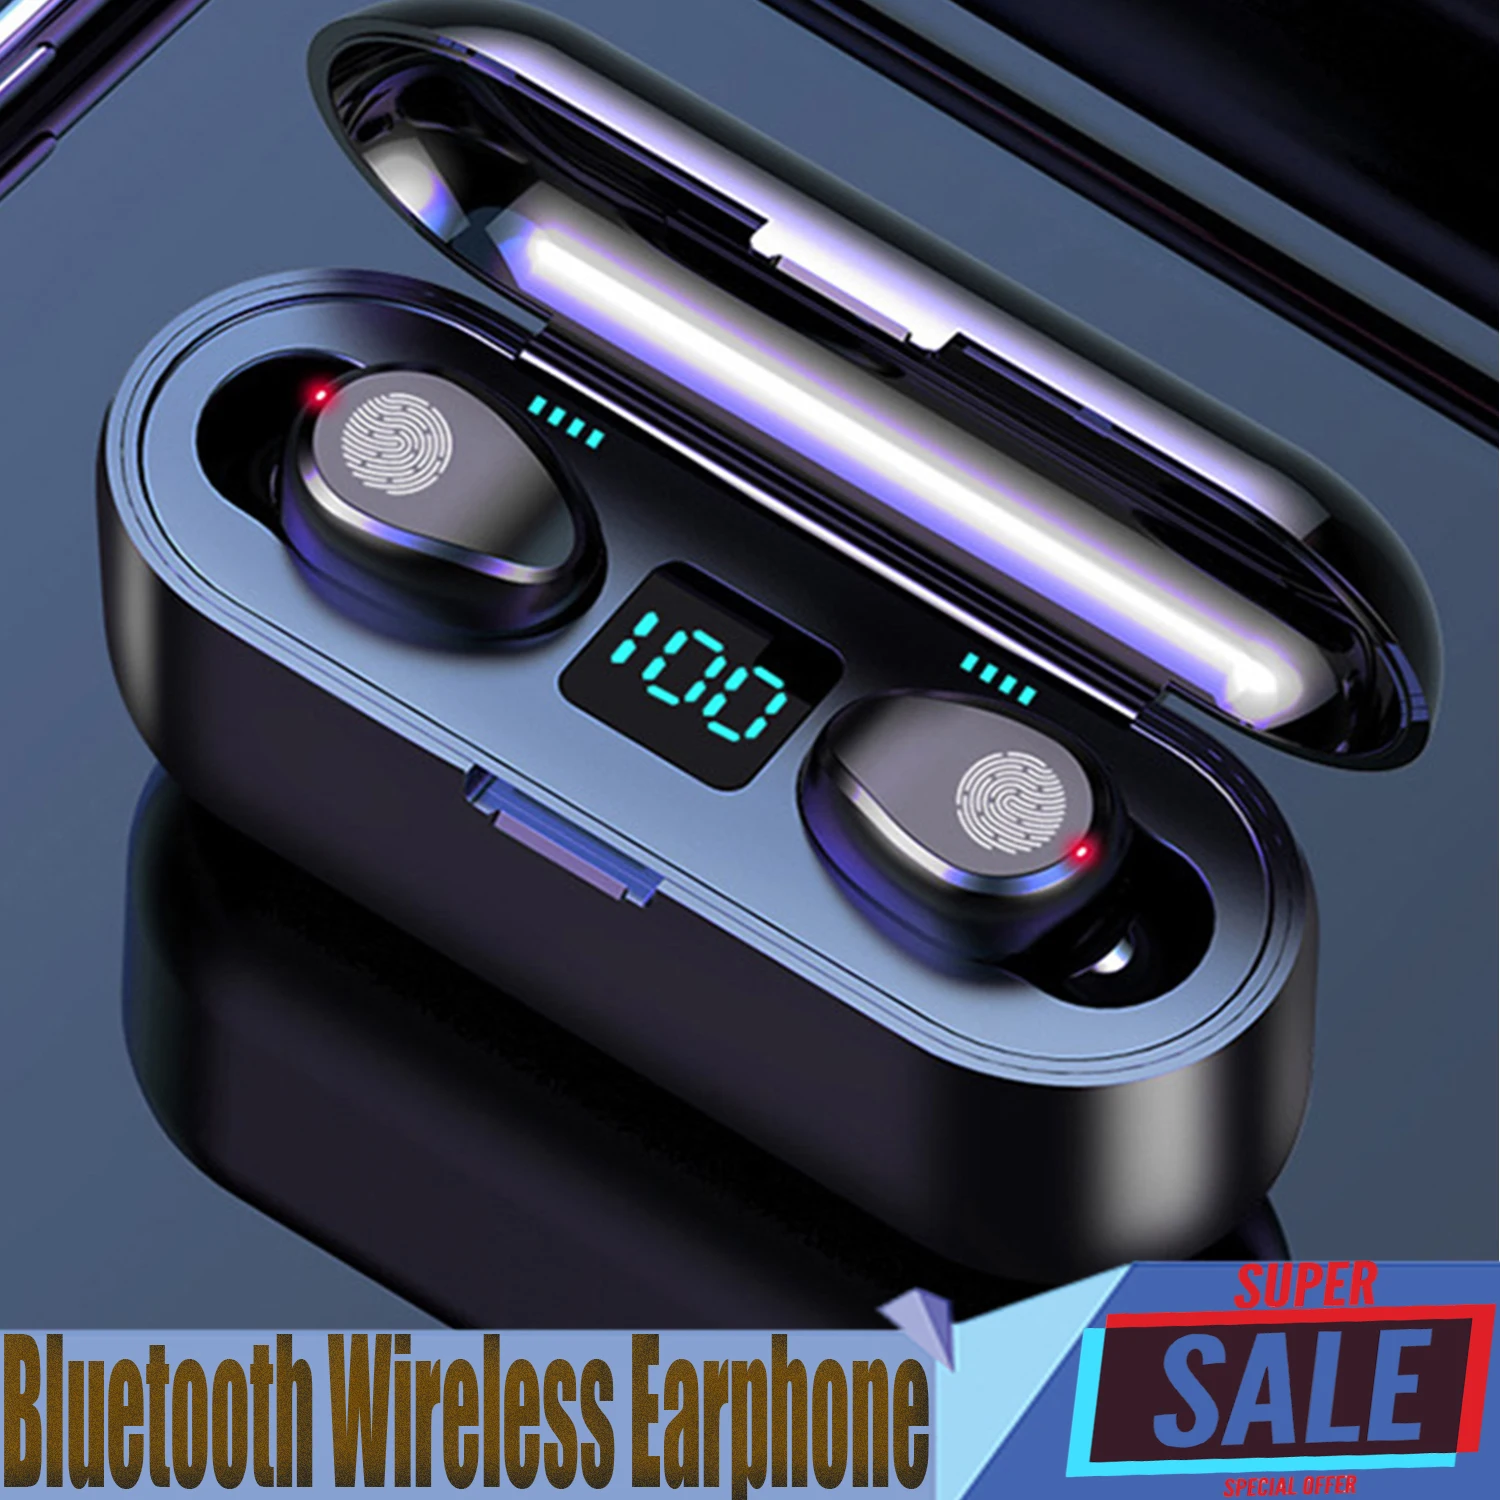 

Bluetooth Wireless Earphones,Touch in Ear TWS,Stereo Surround ,Built-in Siri Voice Assistant,Music Sport Headphones for Phone